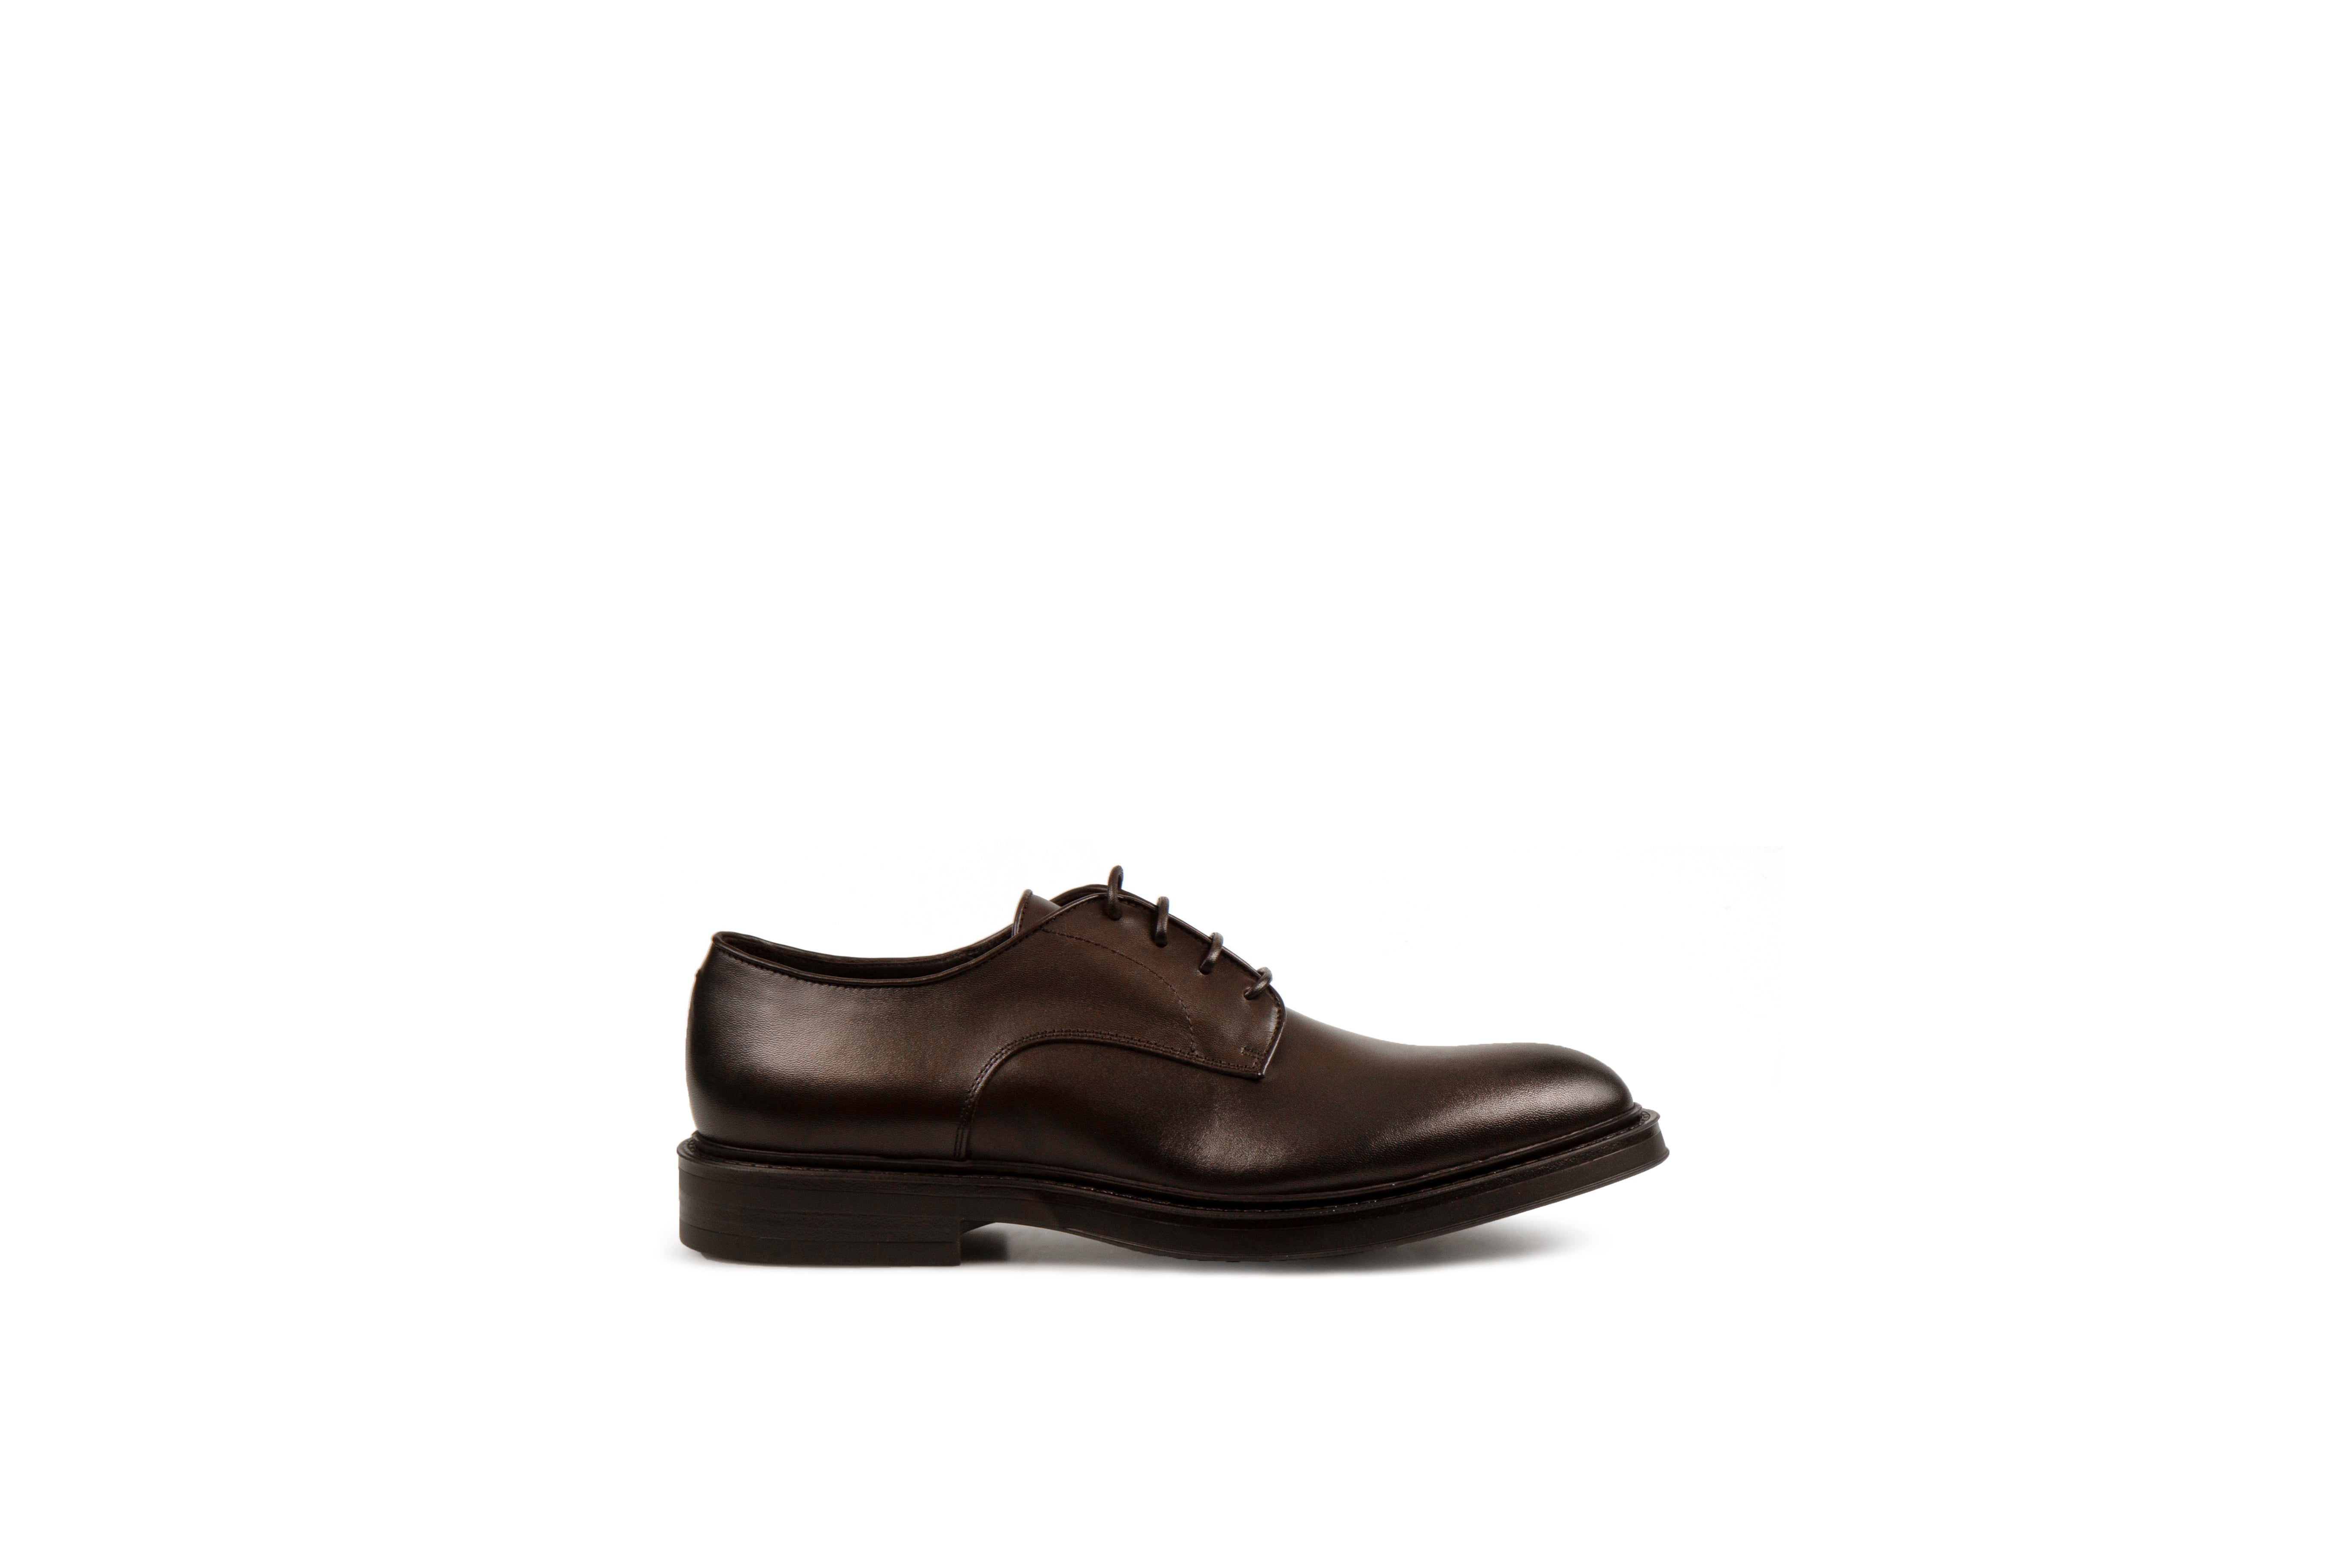 Link Tmoro Derby Calf Leather Shoes